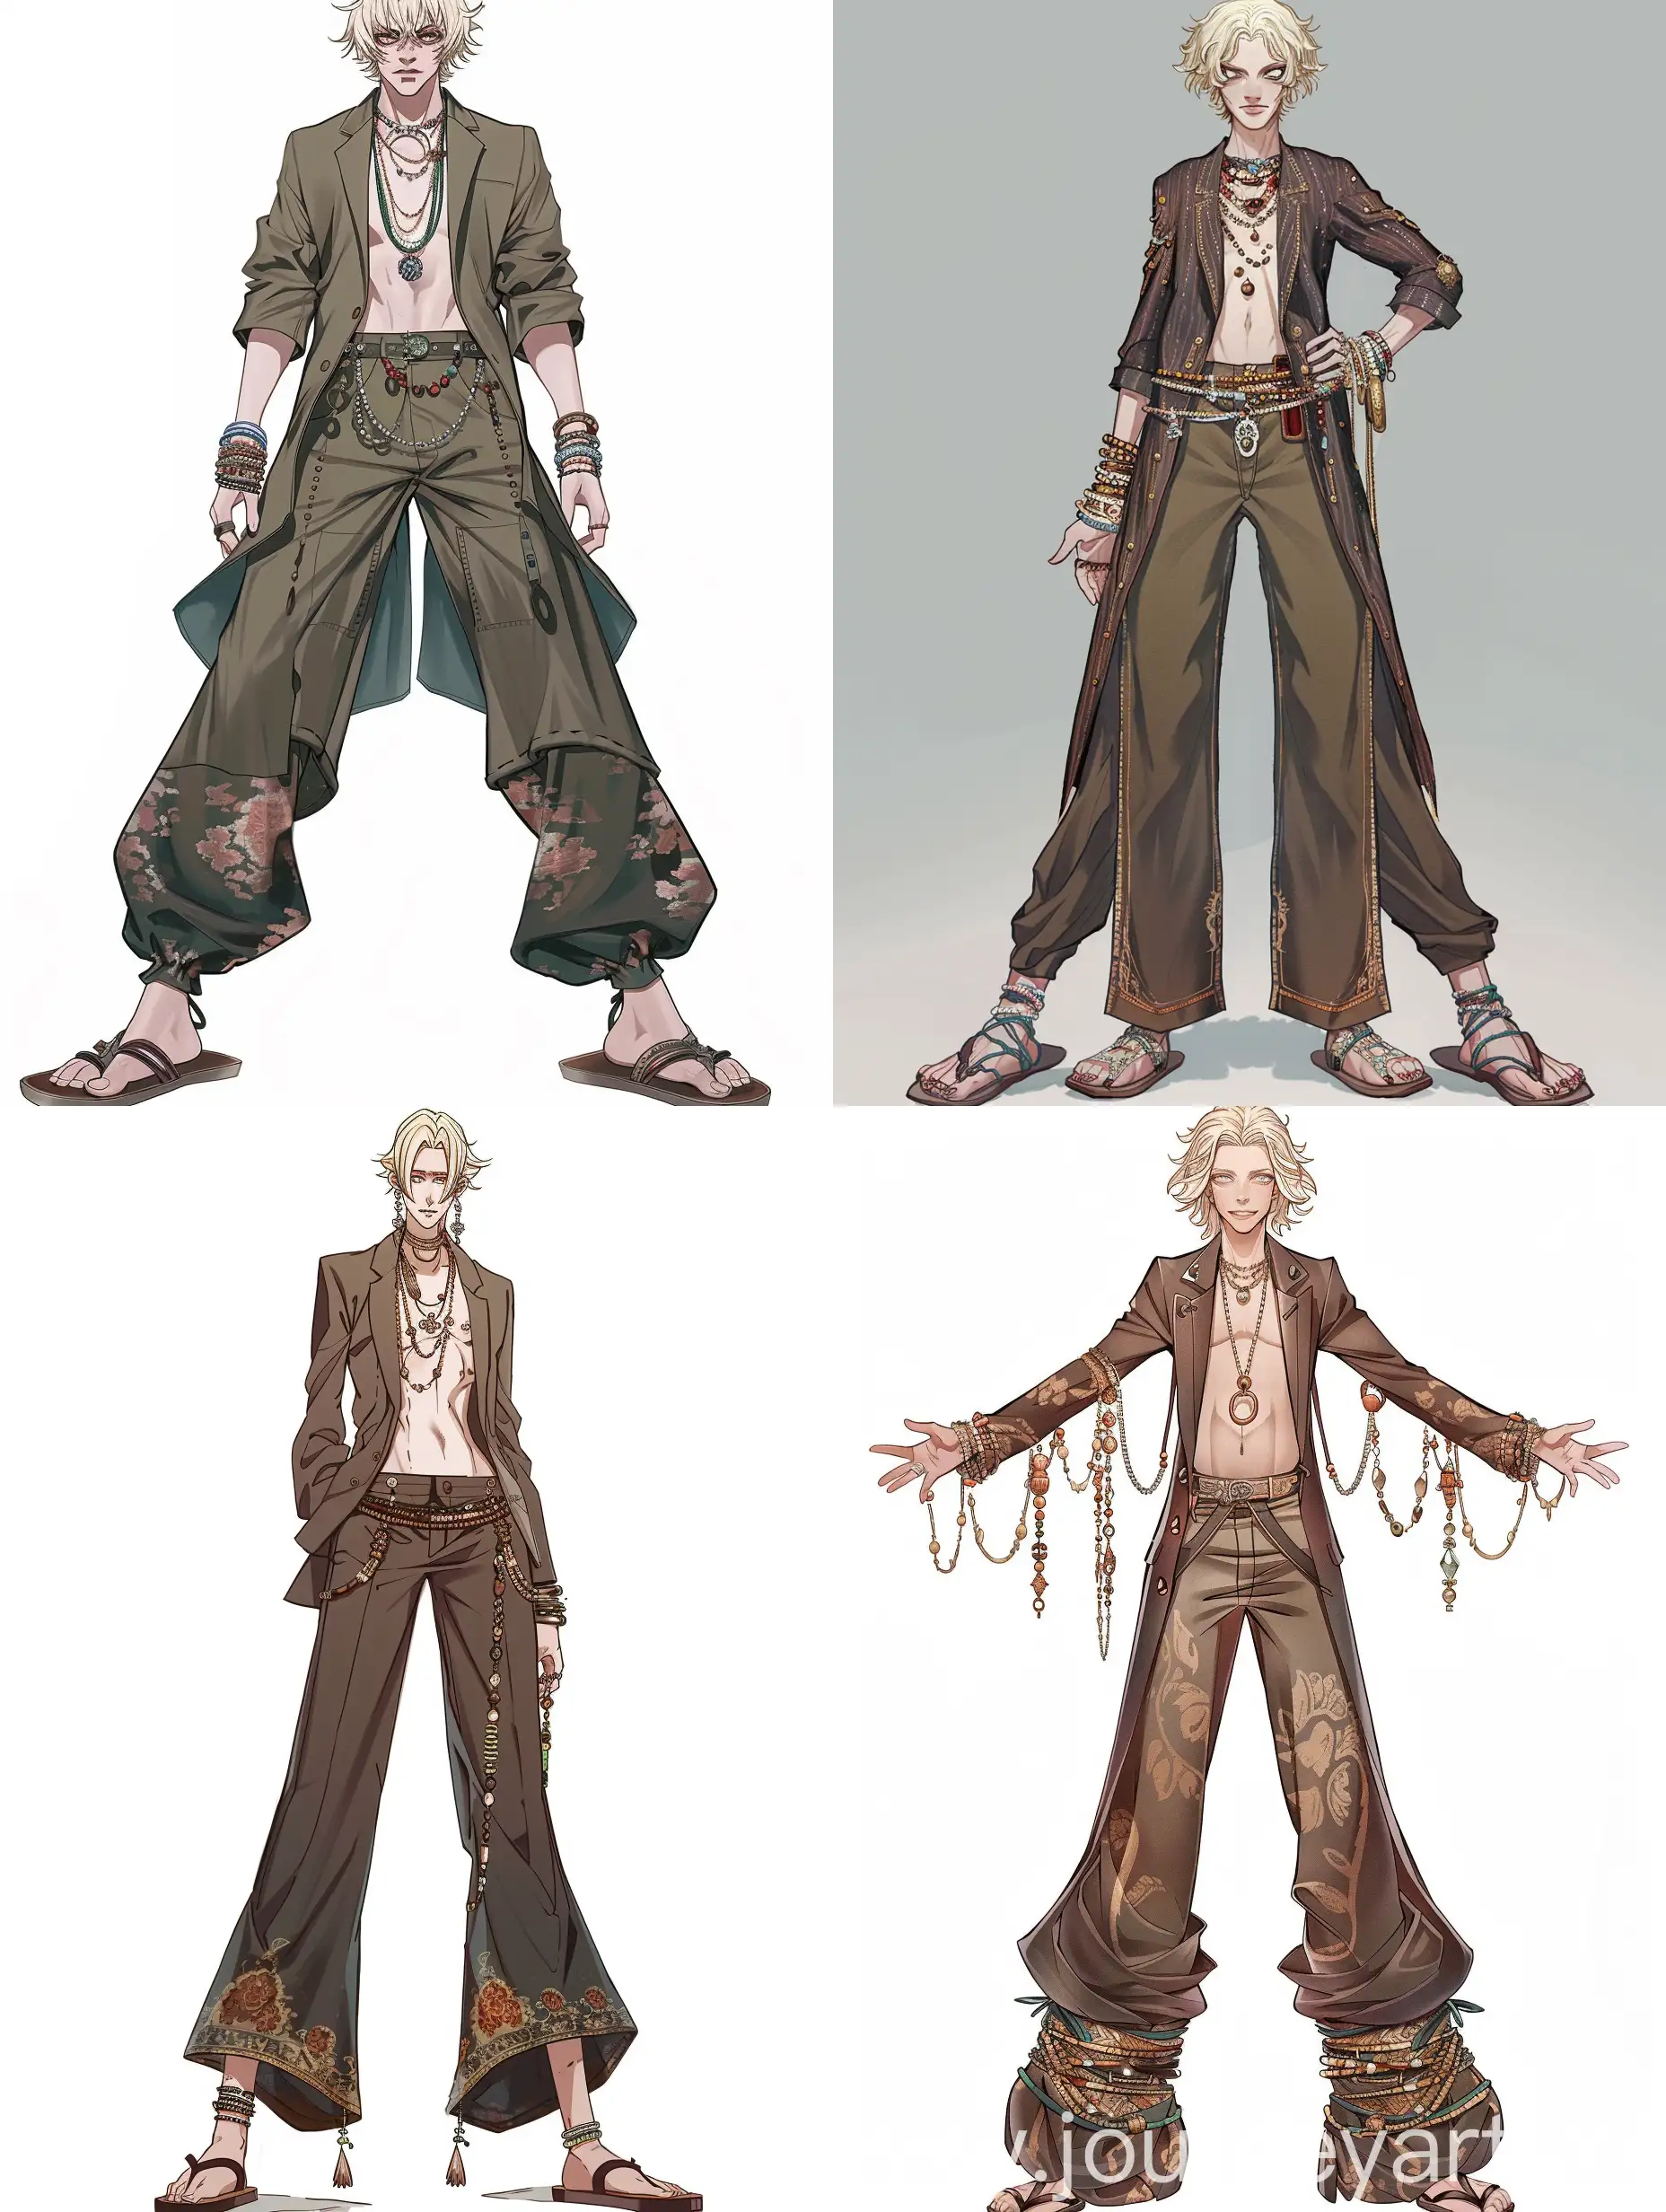 man, anime style, slender, blond, white eyes, pale skin, tall, in a russian style suit, hippie style, many bracelets, large wide and short pants, sandals on his feet, full height, multiple times